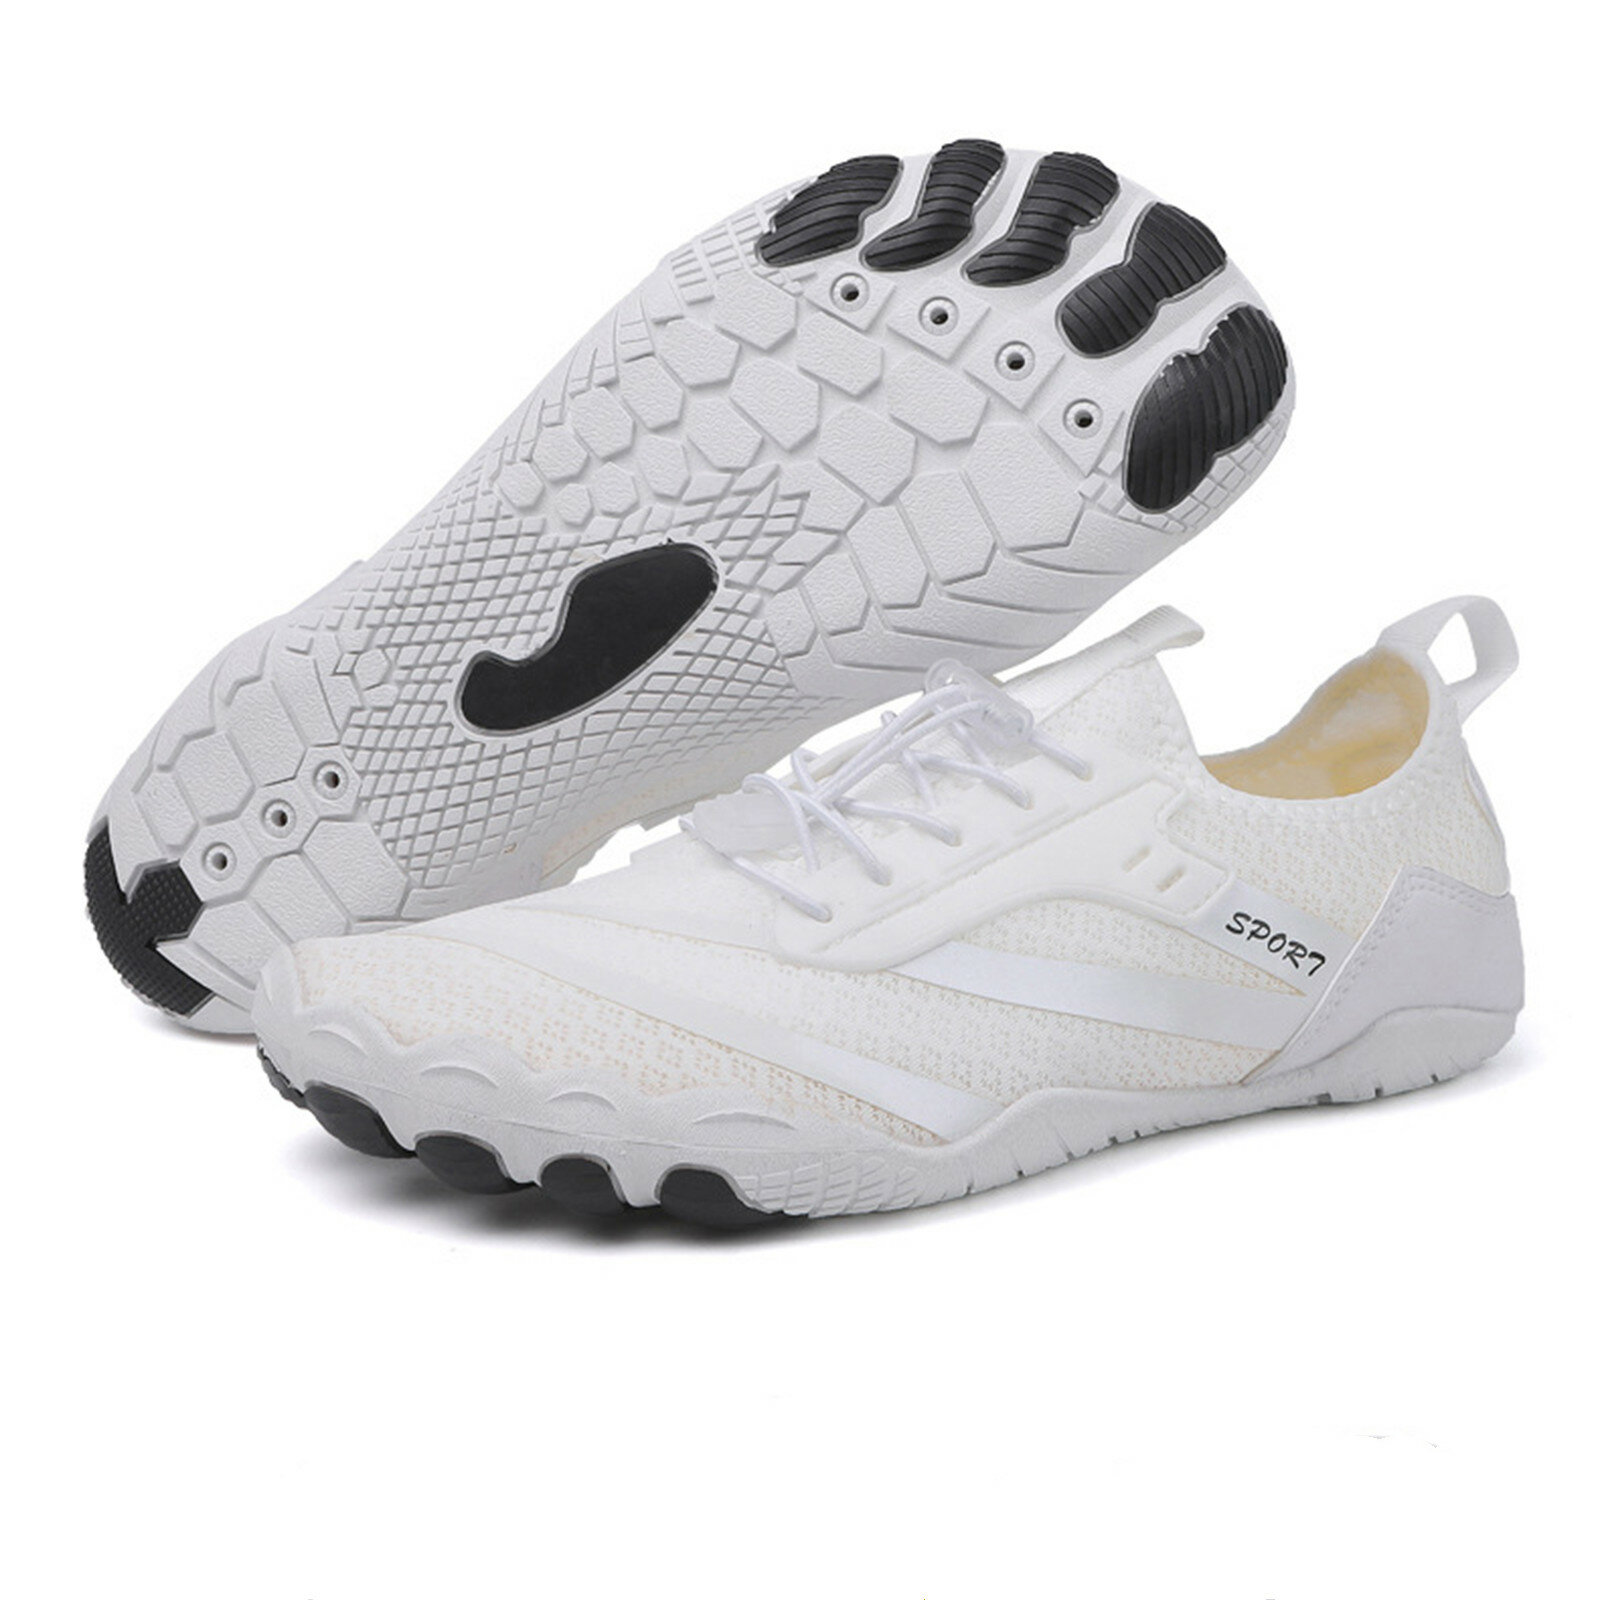 Multi-Functional Traced On The Beach Quick Drying Shoes Outdoor Leisure On Foot Running Water Shoes